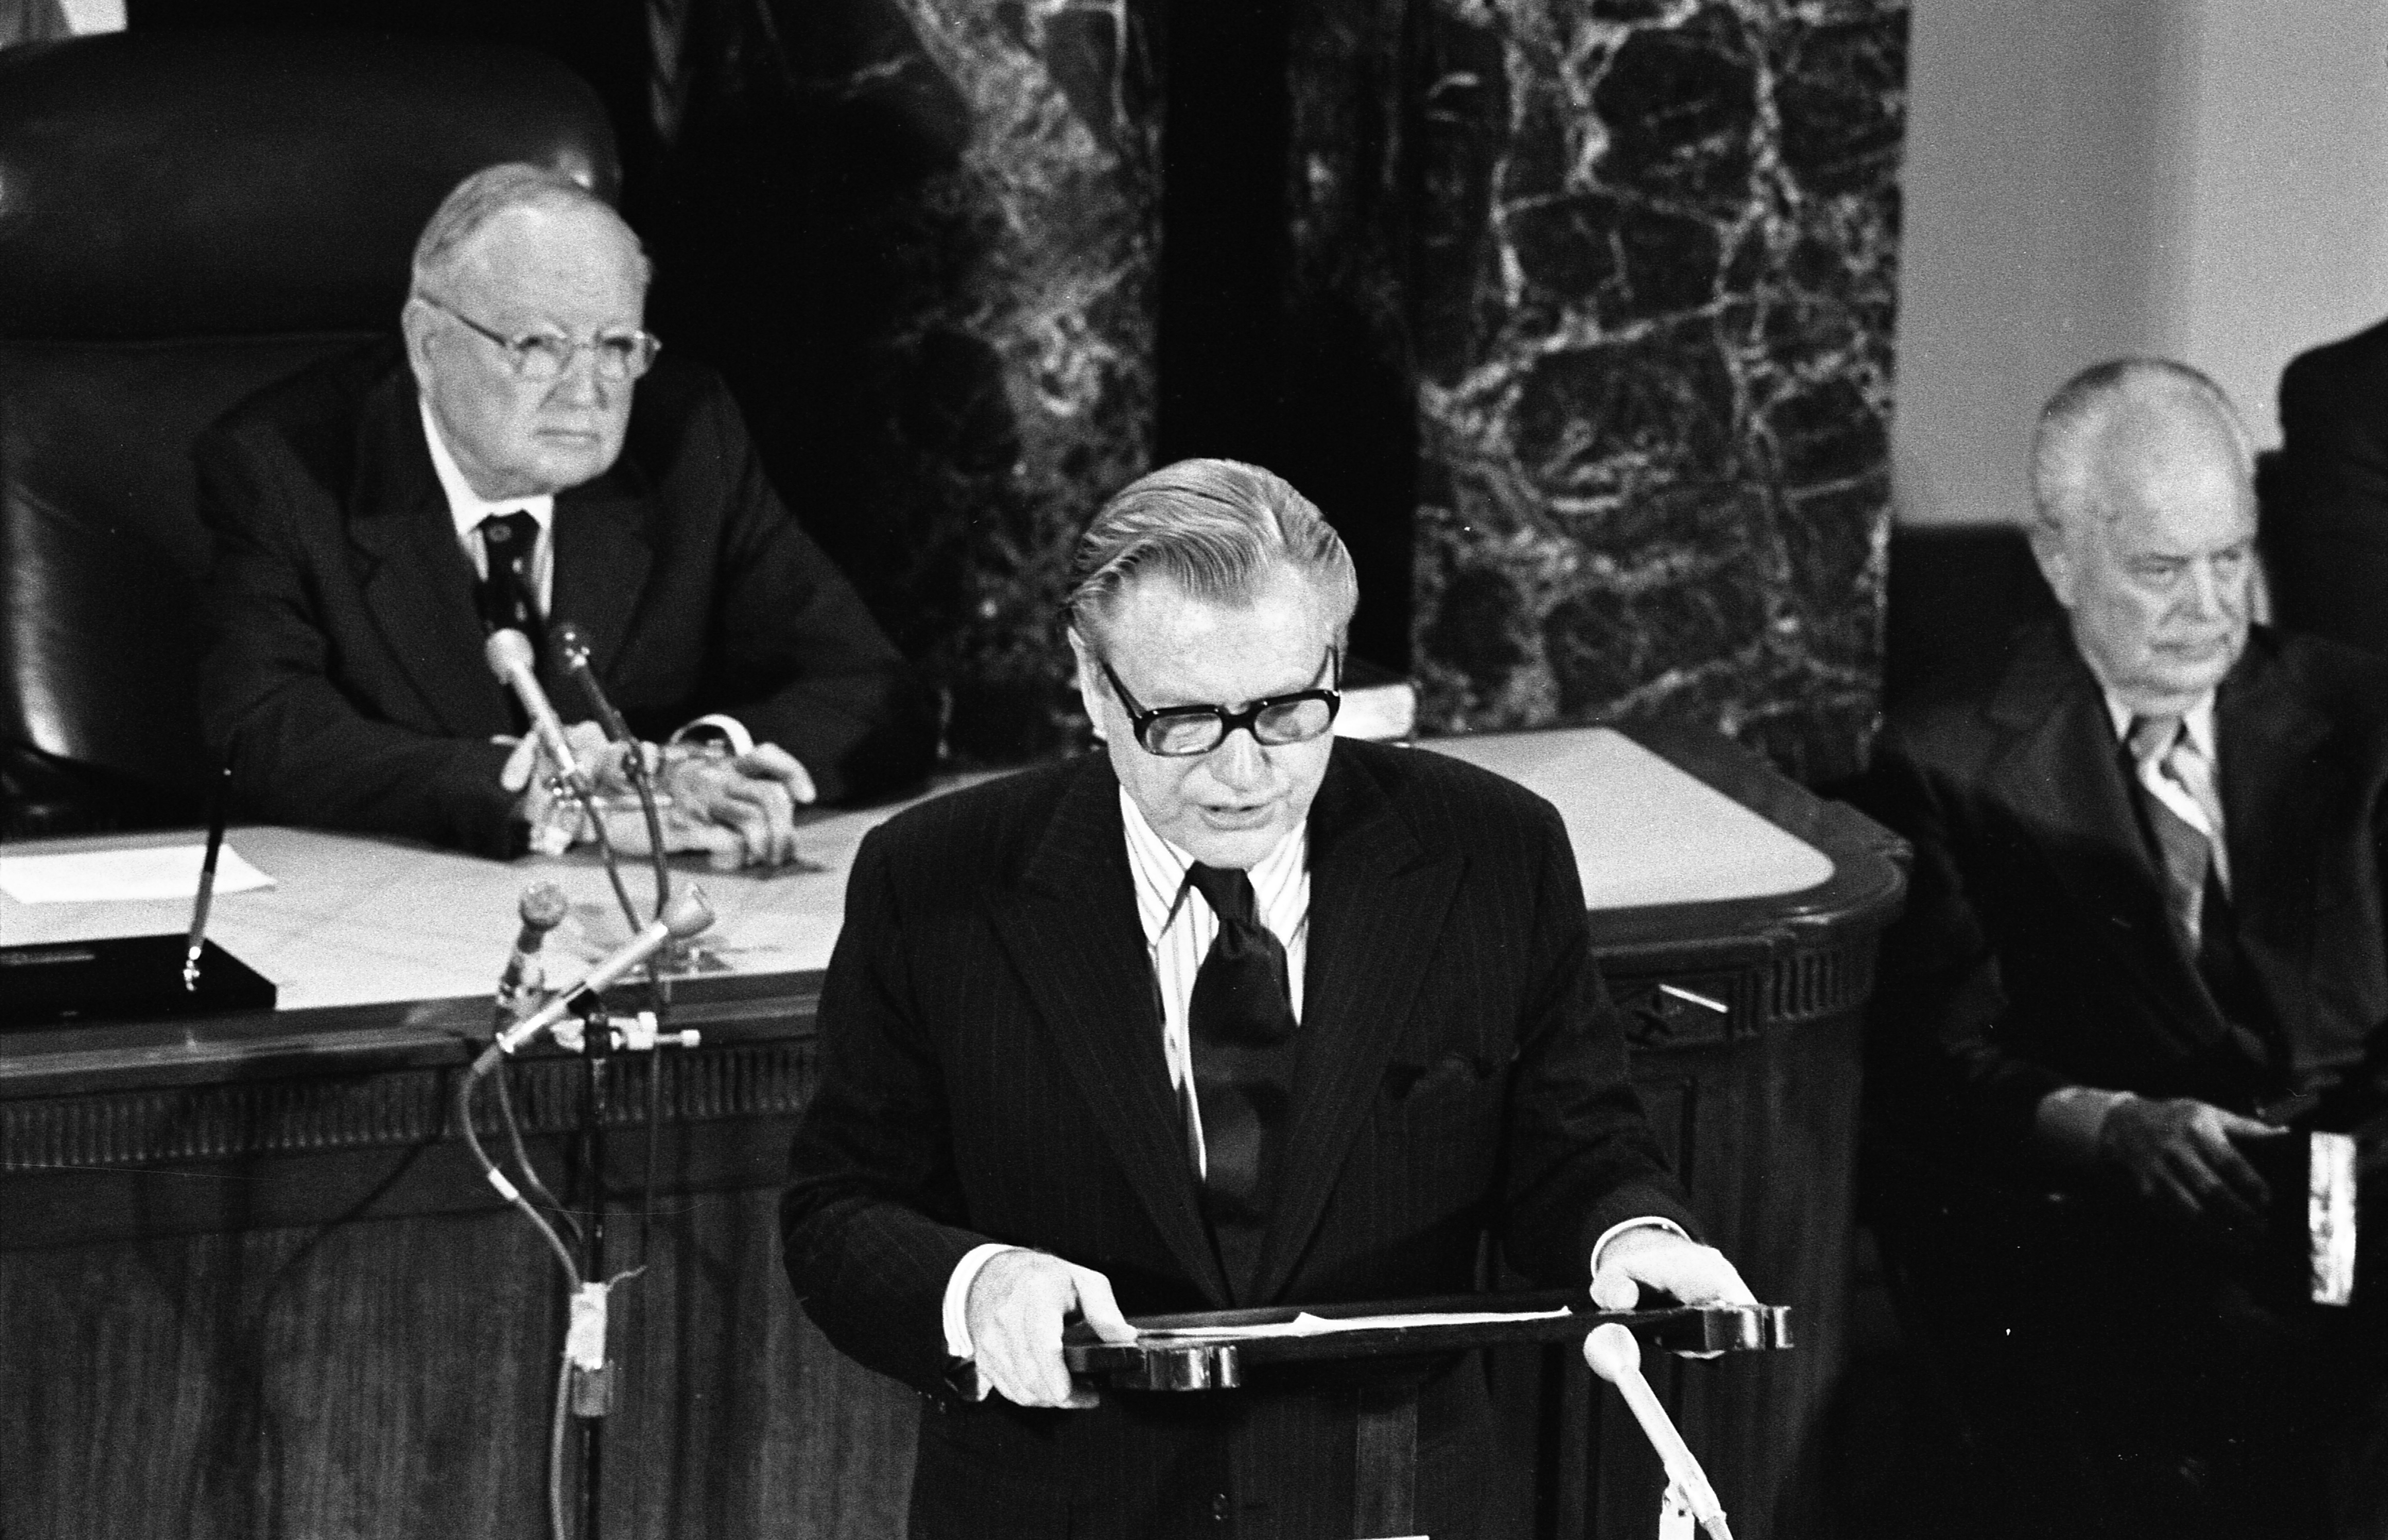 Nelson Rockefeller addressing the joint assembly after being sworn in as Vice President.